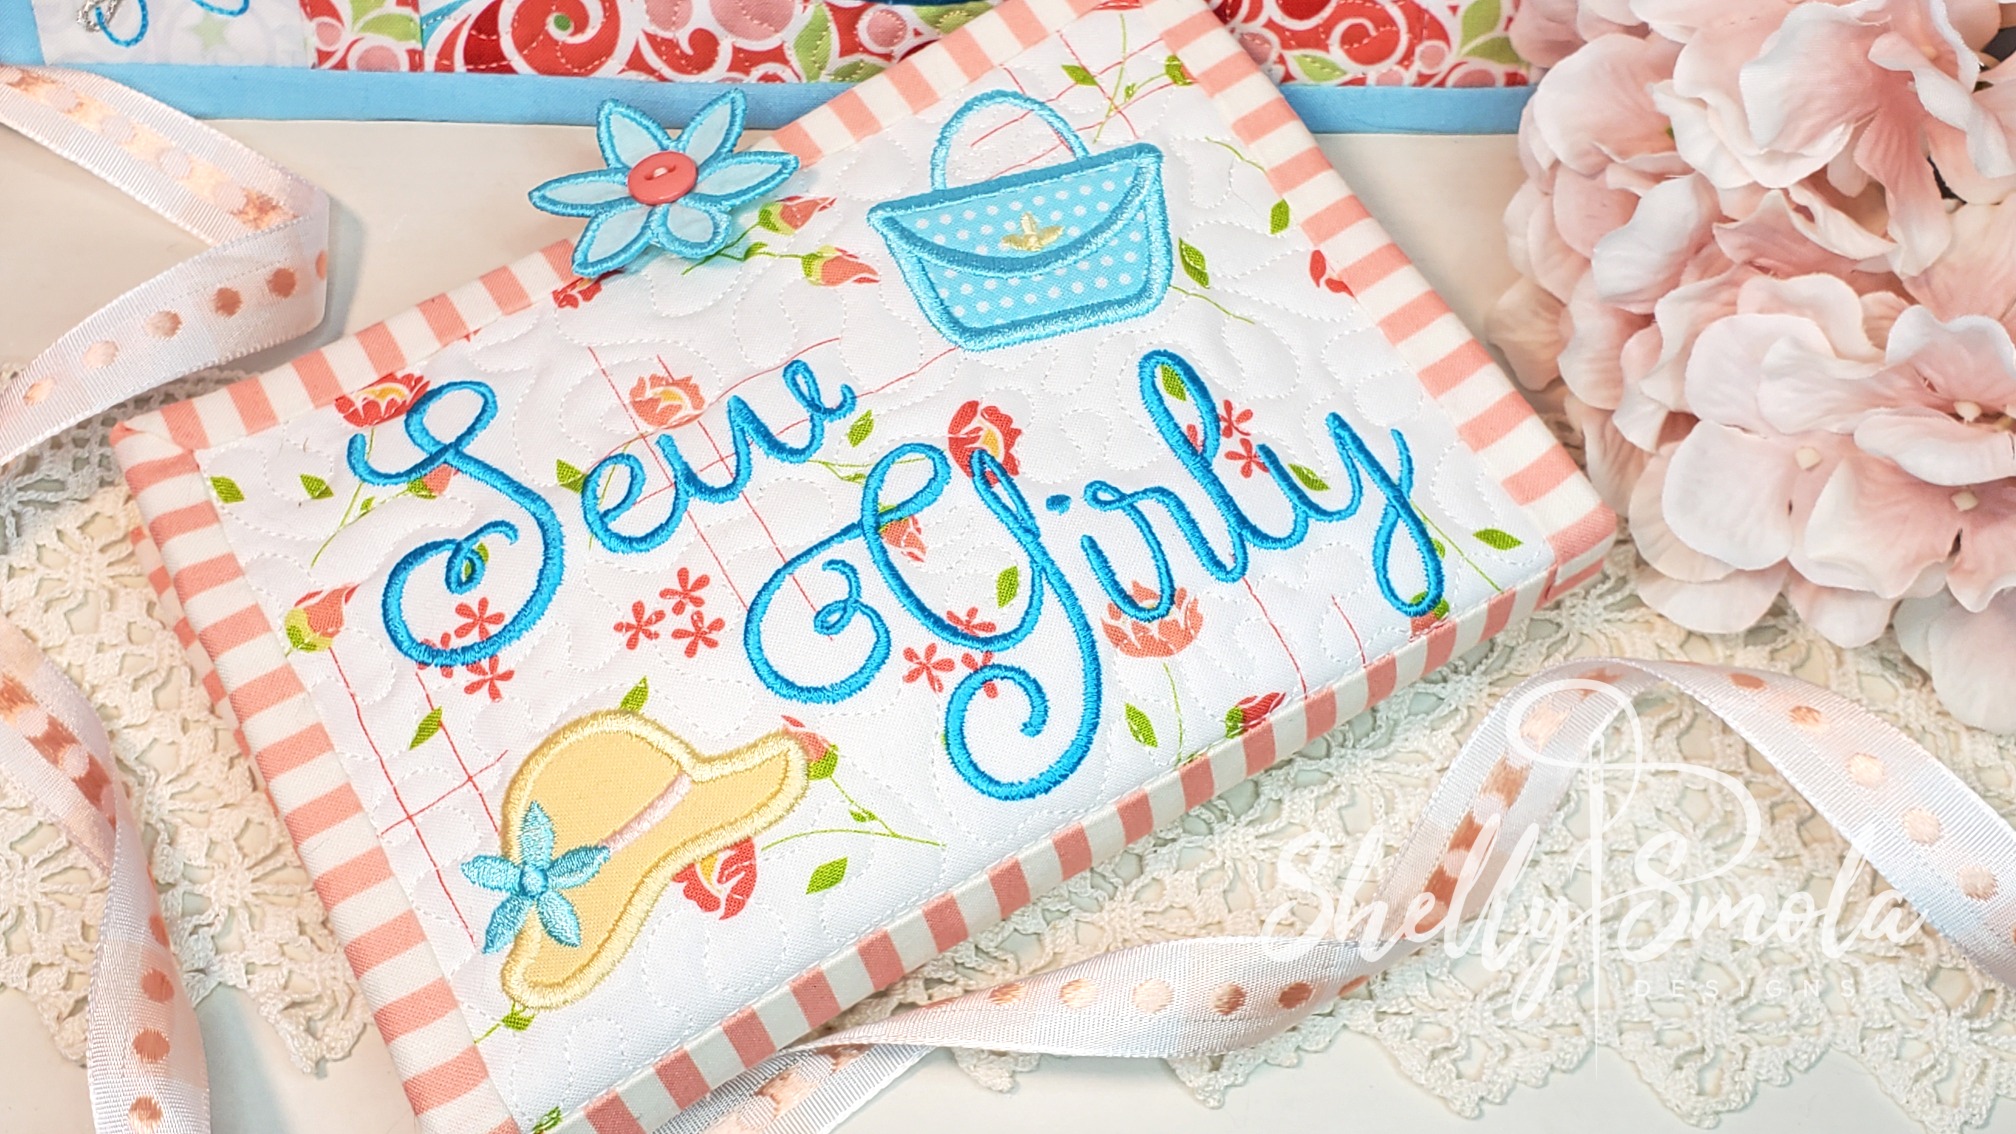 Sew Girly Makeup Case by Shelly Smola